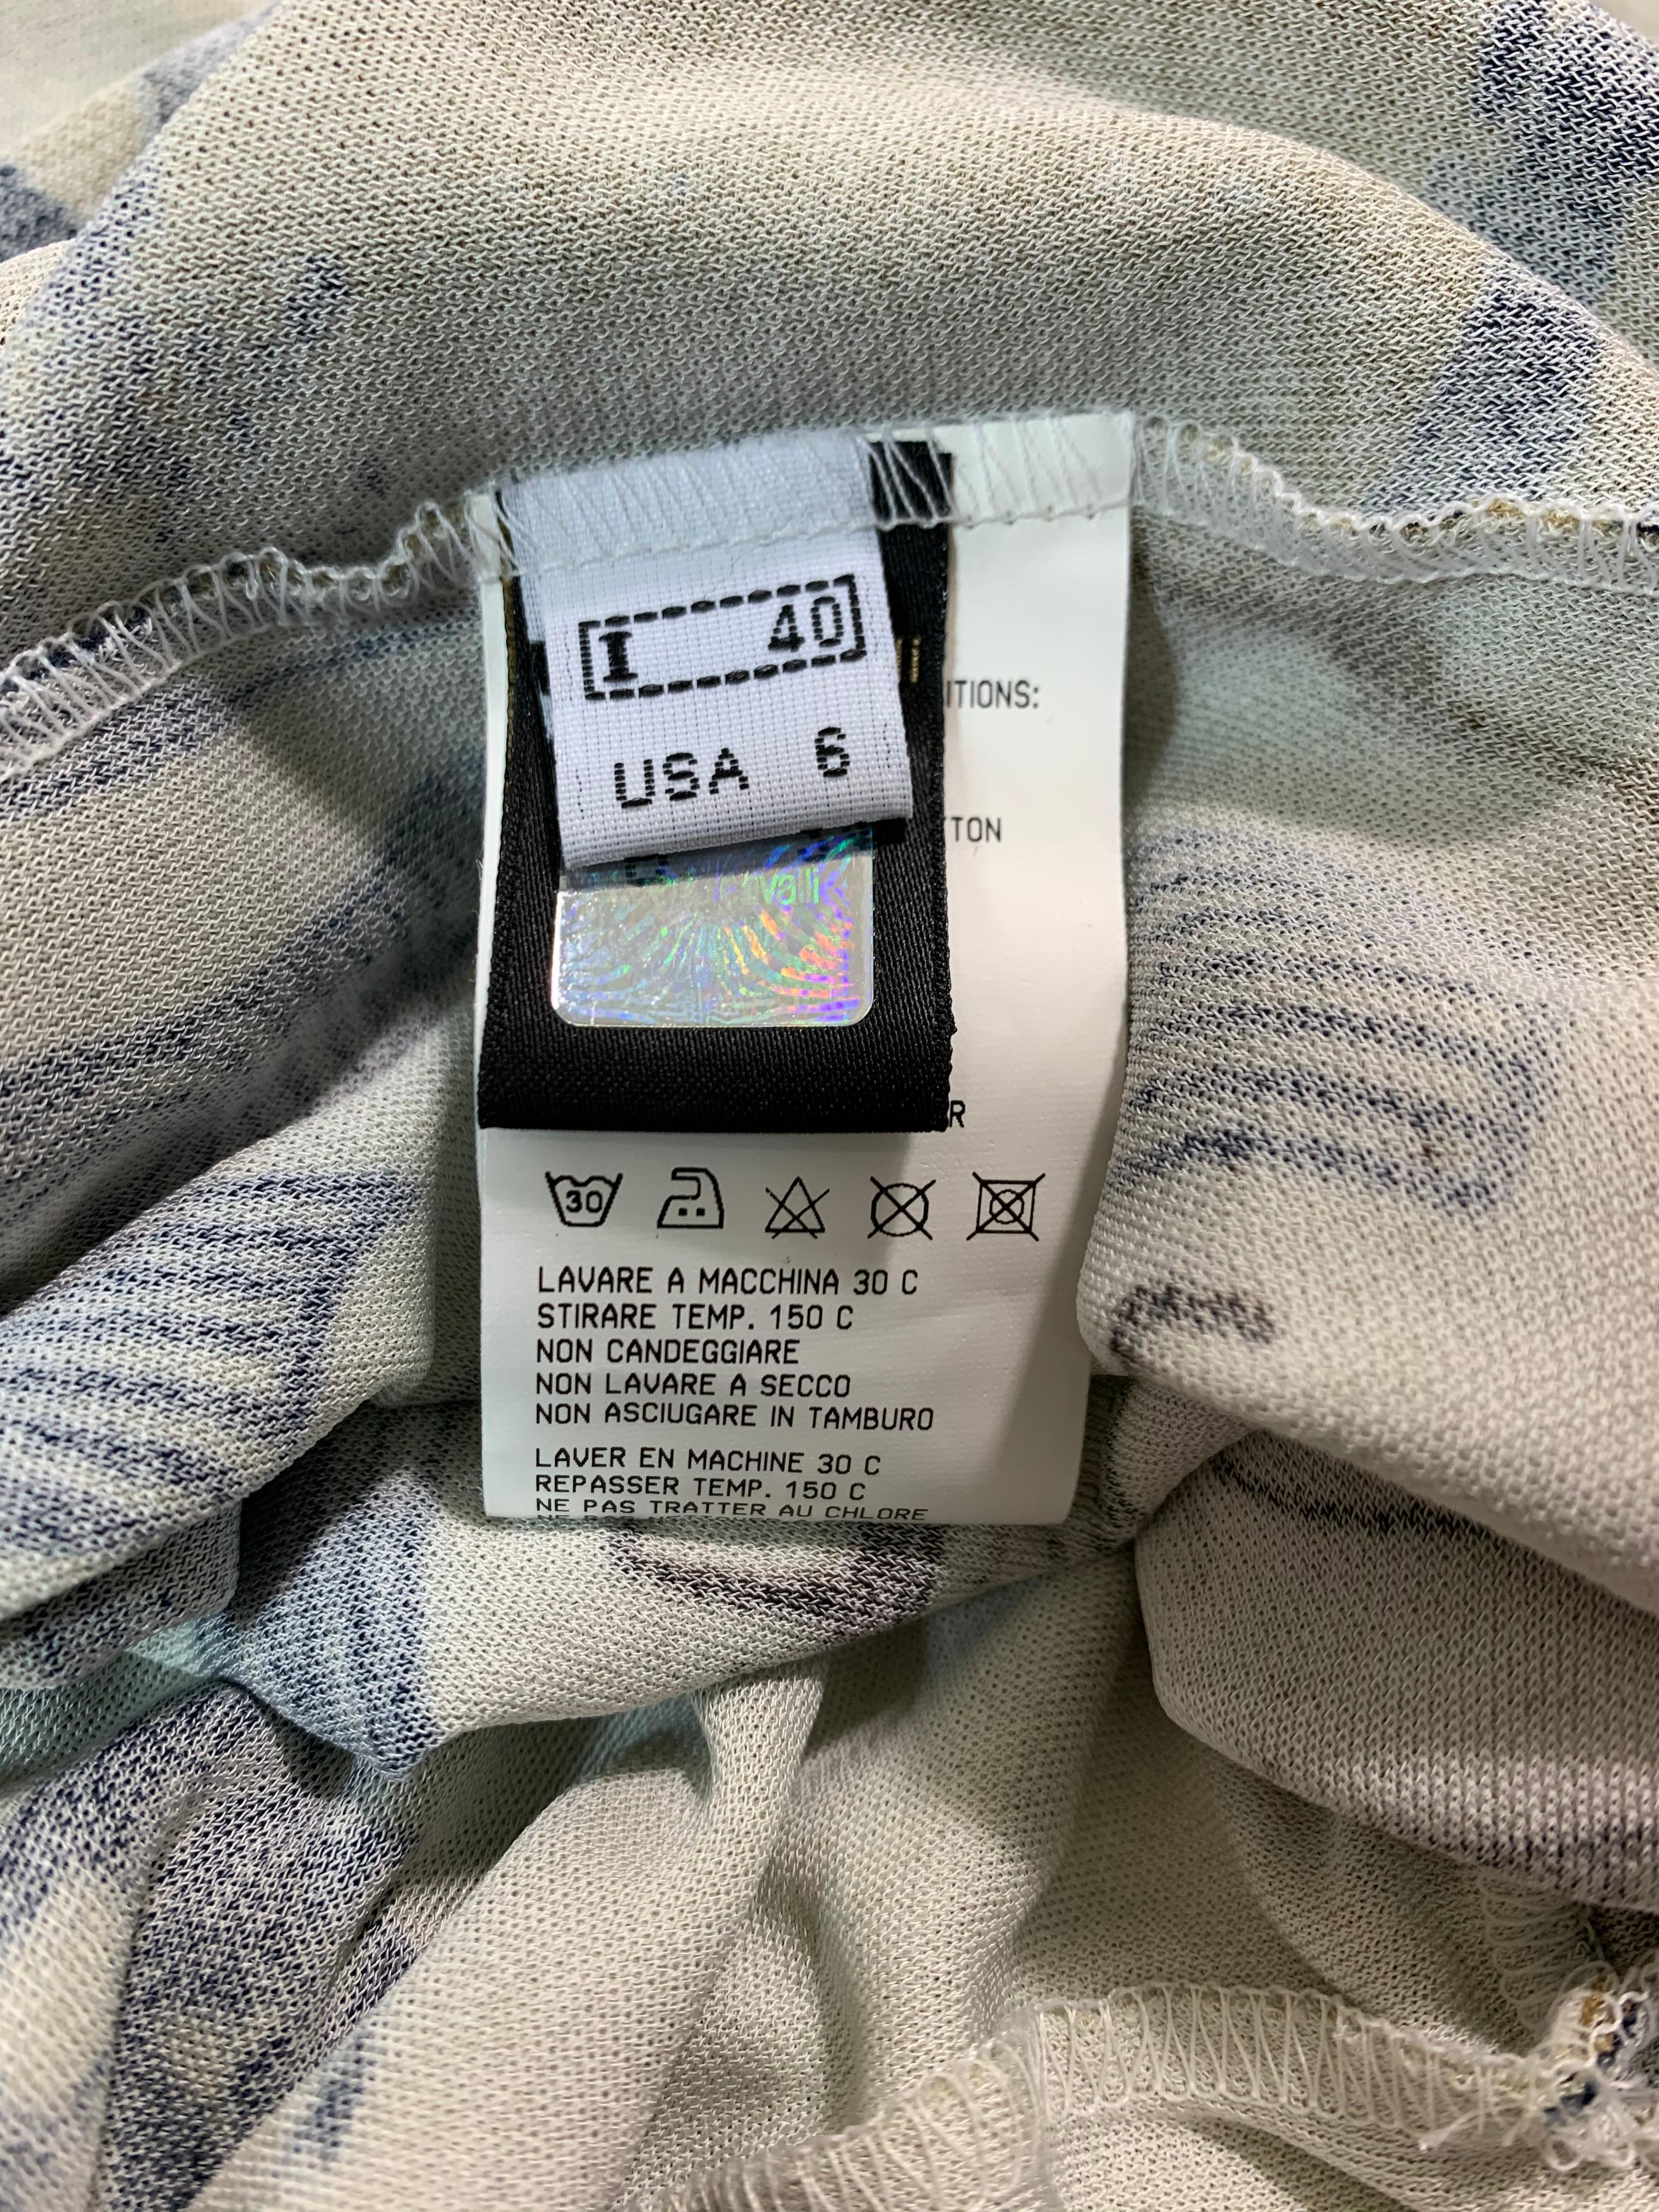 italian size 40 in us clothing